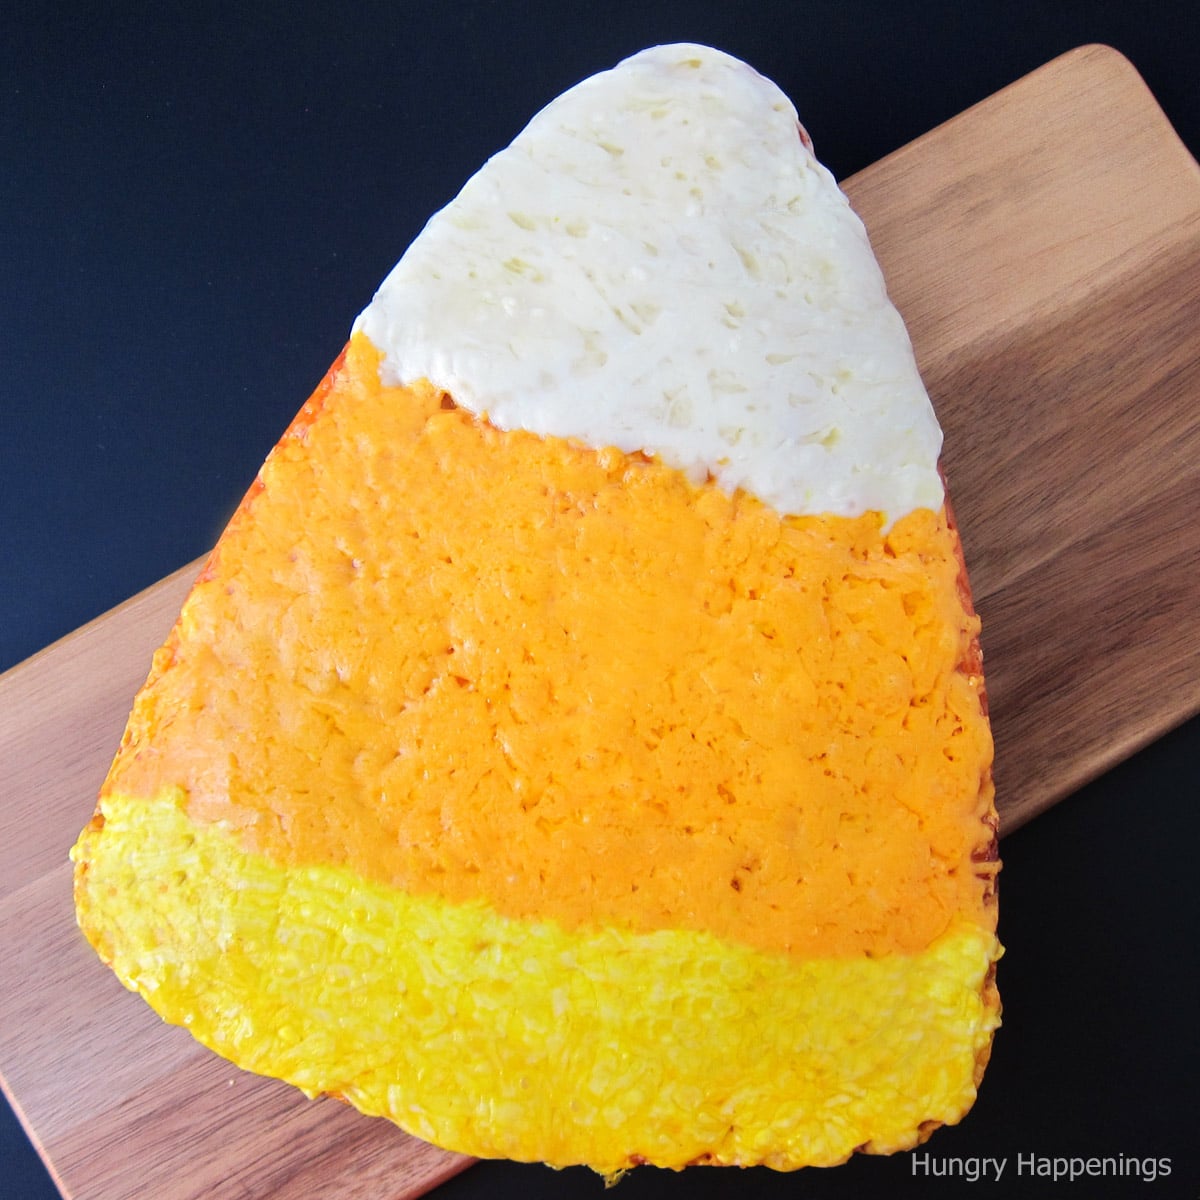 Halloween cheese bread decorated like candy corn